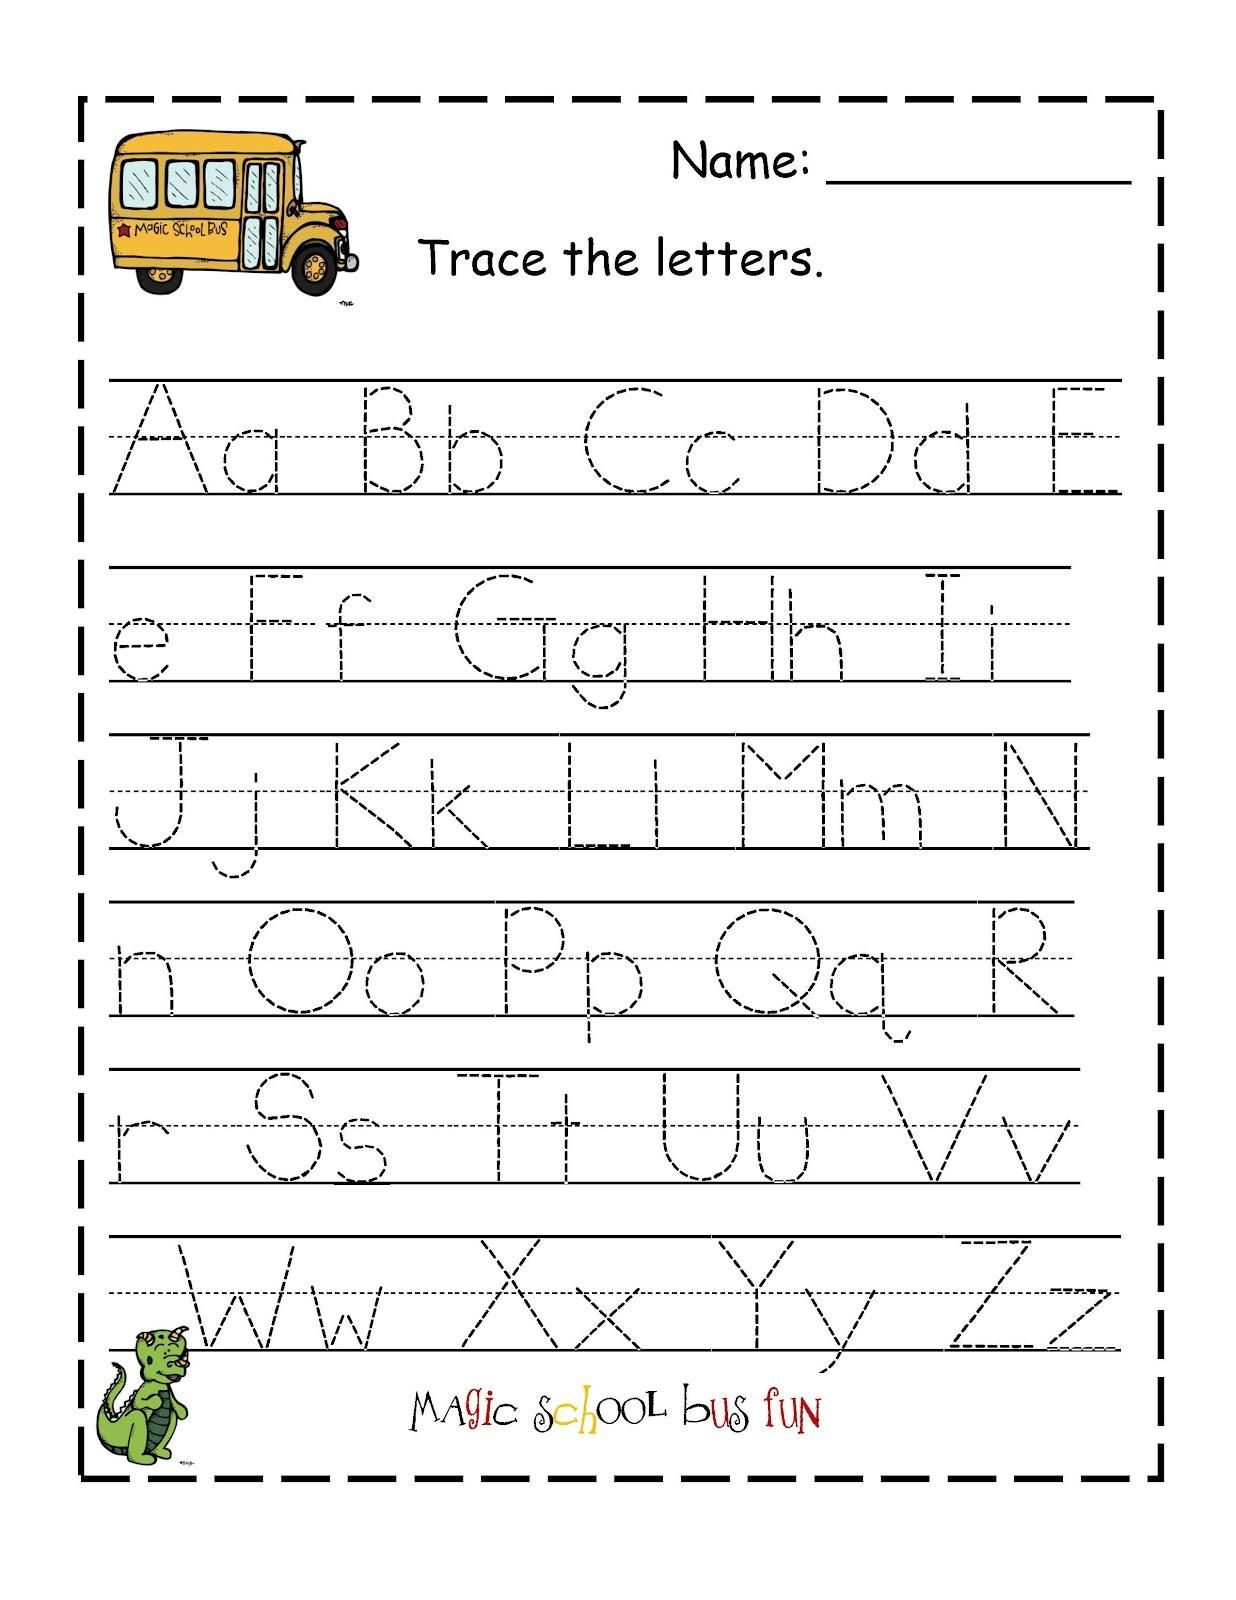 Free Printable Abc Tracing Worksheets #2 | Places To Visit - Free Printable Letter Tracing Sheets